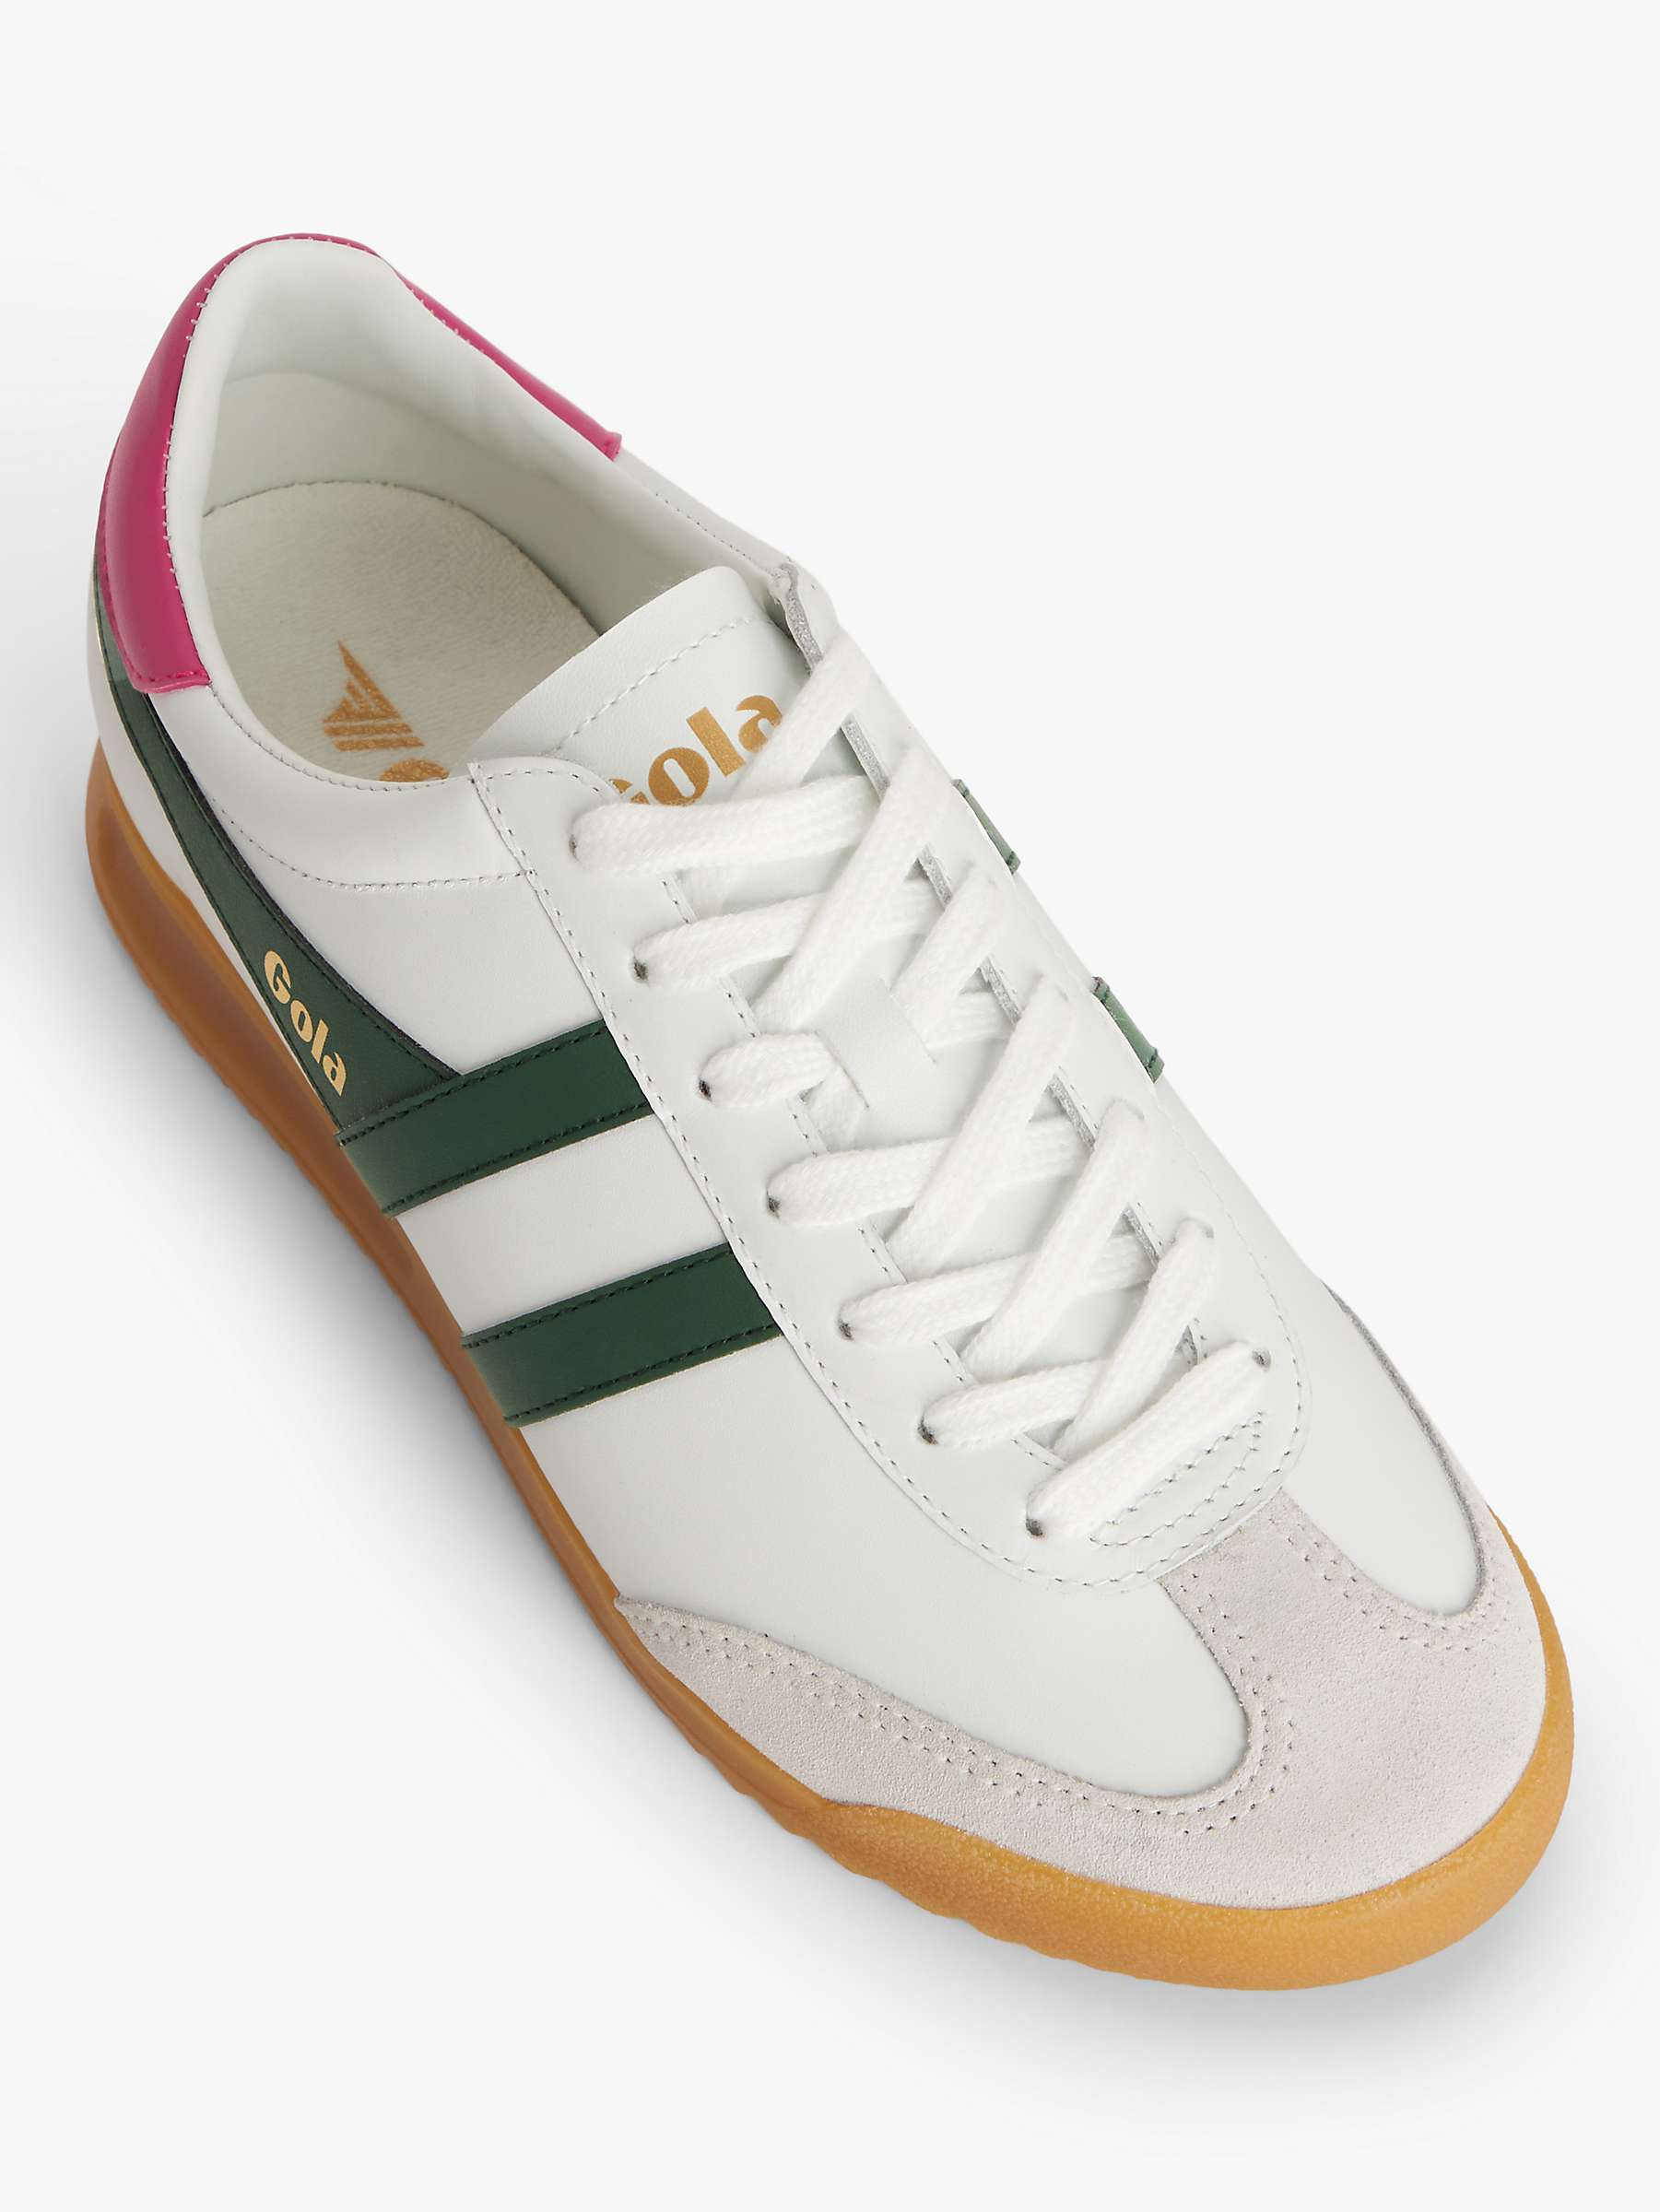 Buy Gola Torpedo Leather Trainers, Green/Fuchsia Online at johnlewis.com